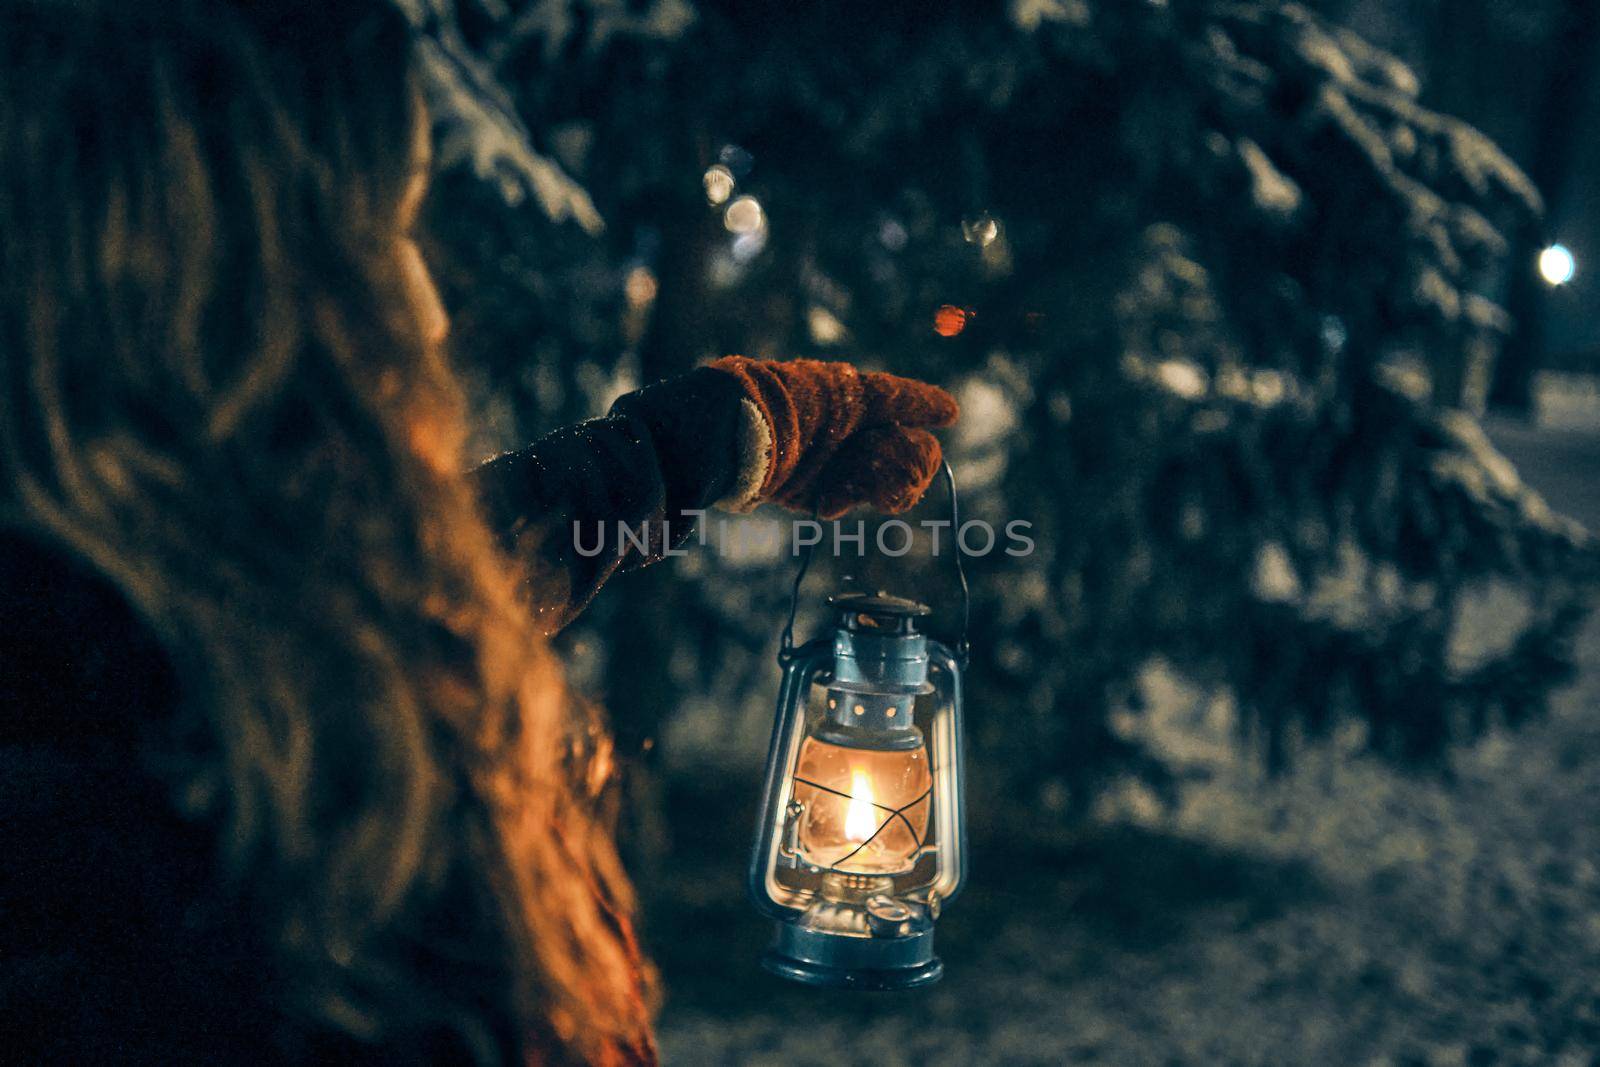 Young girl in winter forest fairy tale by snep_photo